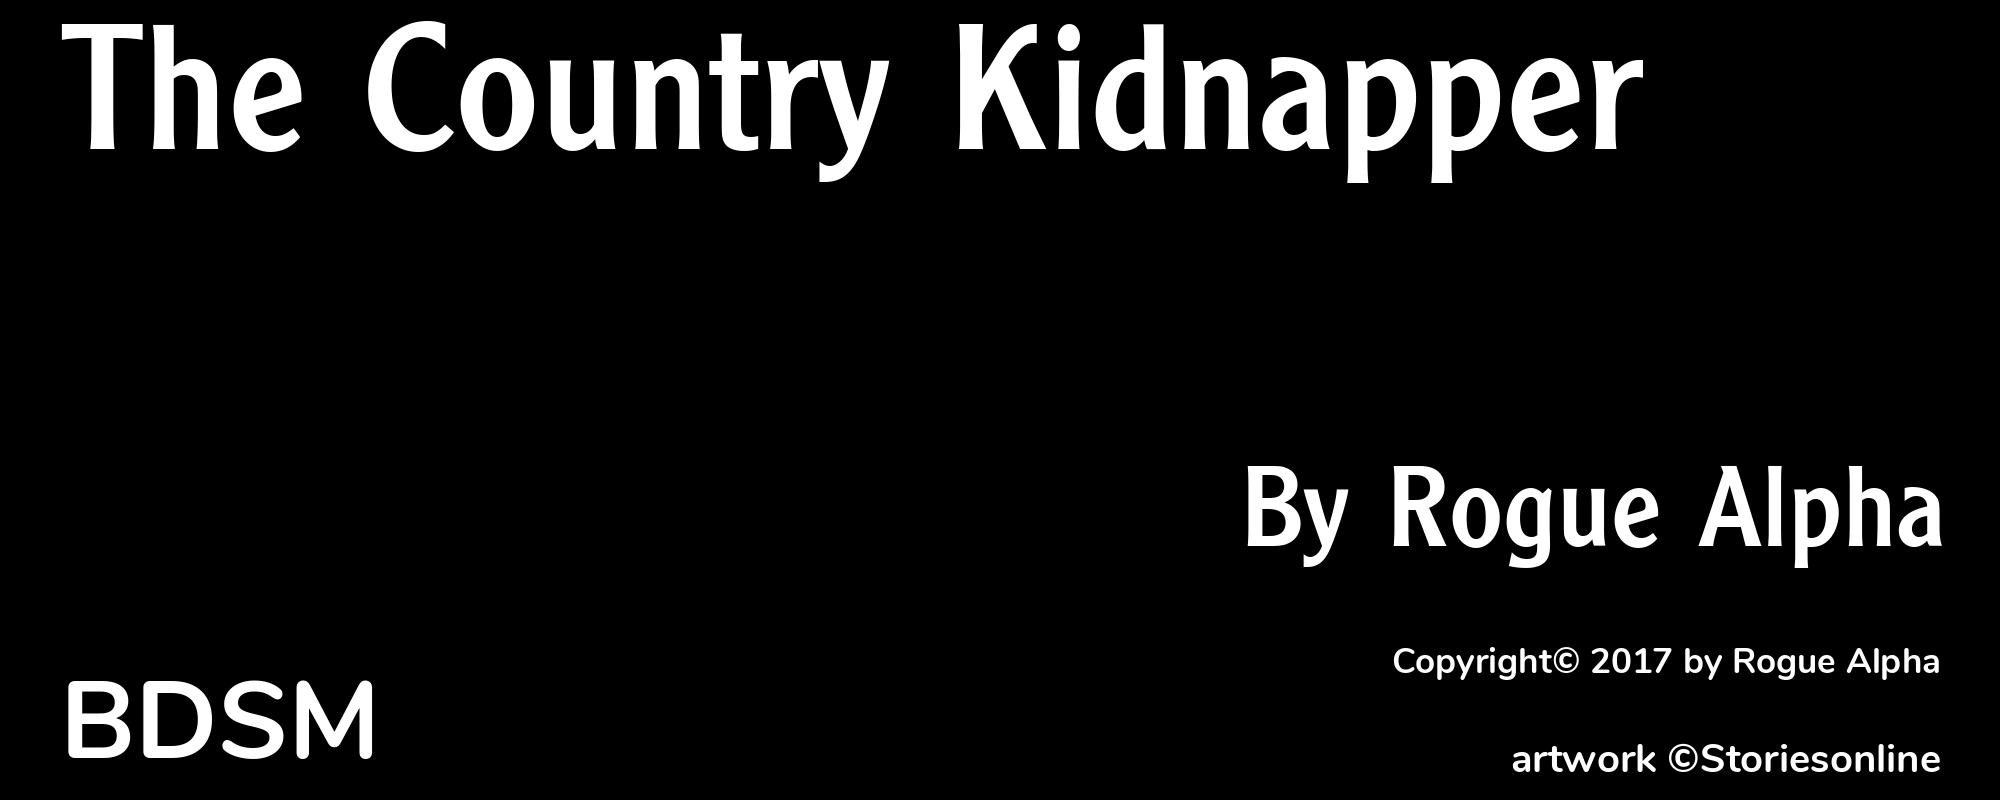 The Country Kidnapper  - Cover